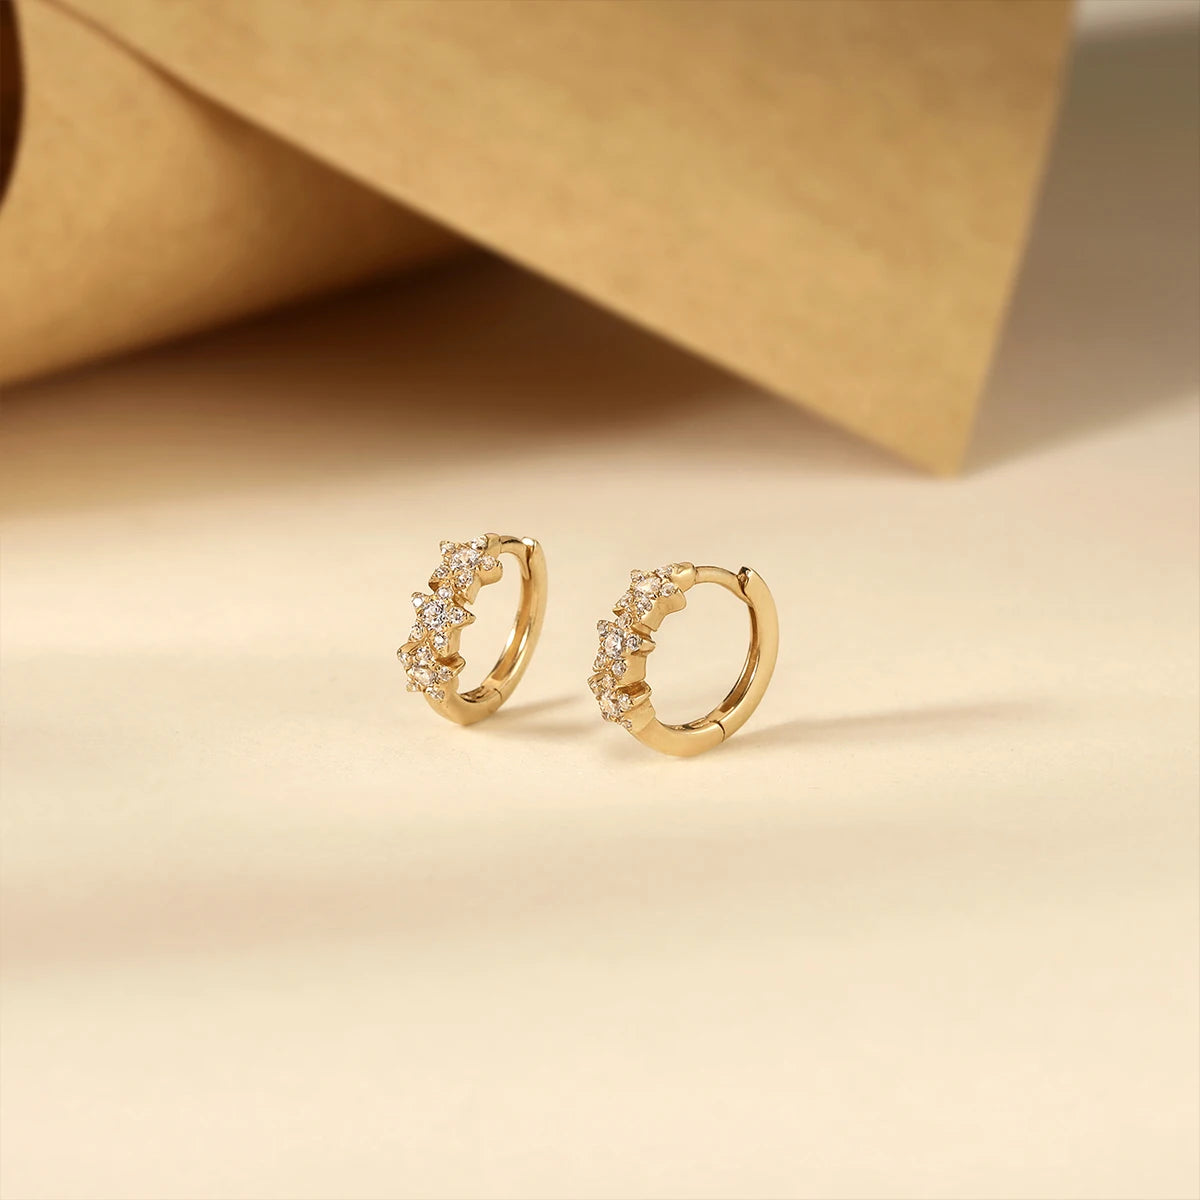 14K gold diamond earrings with natural GH-SI diamonds small huggie earrings solid gold helix earring